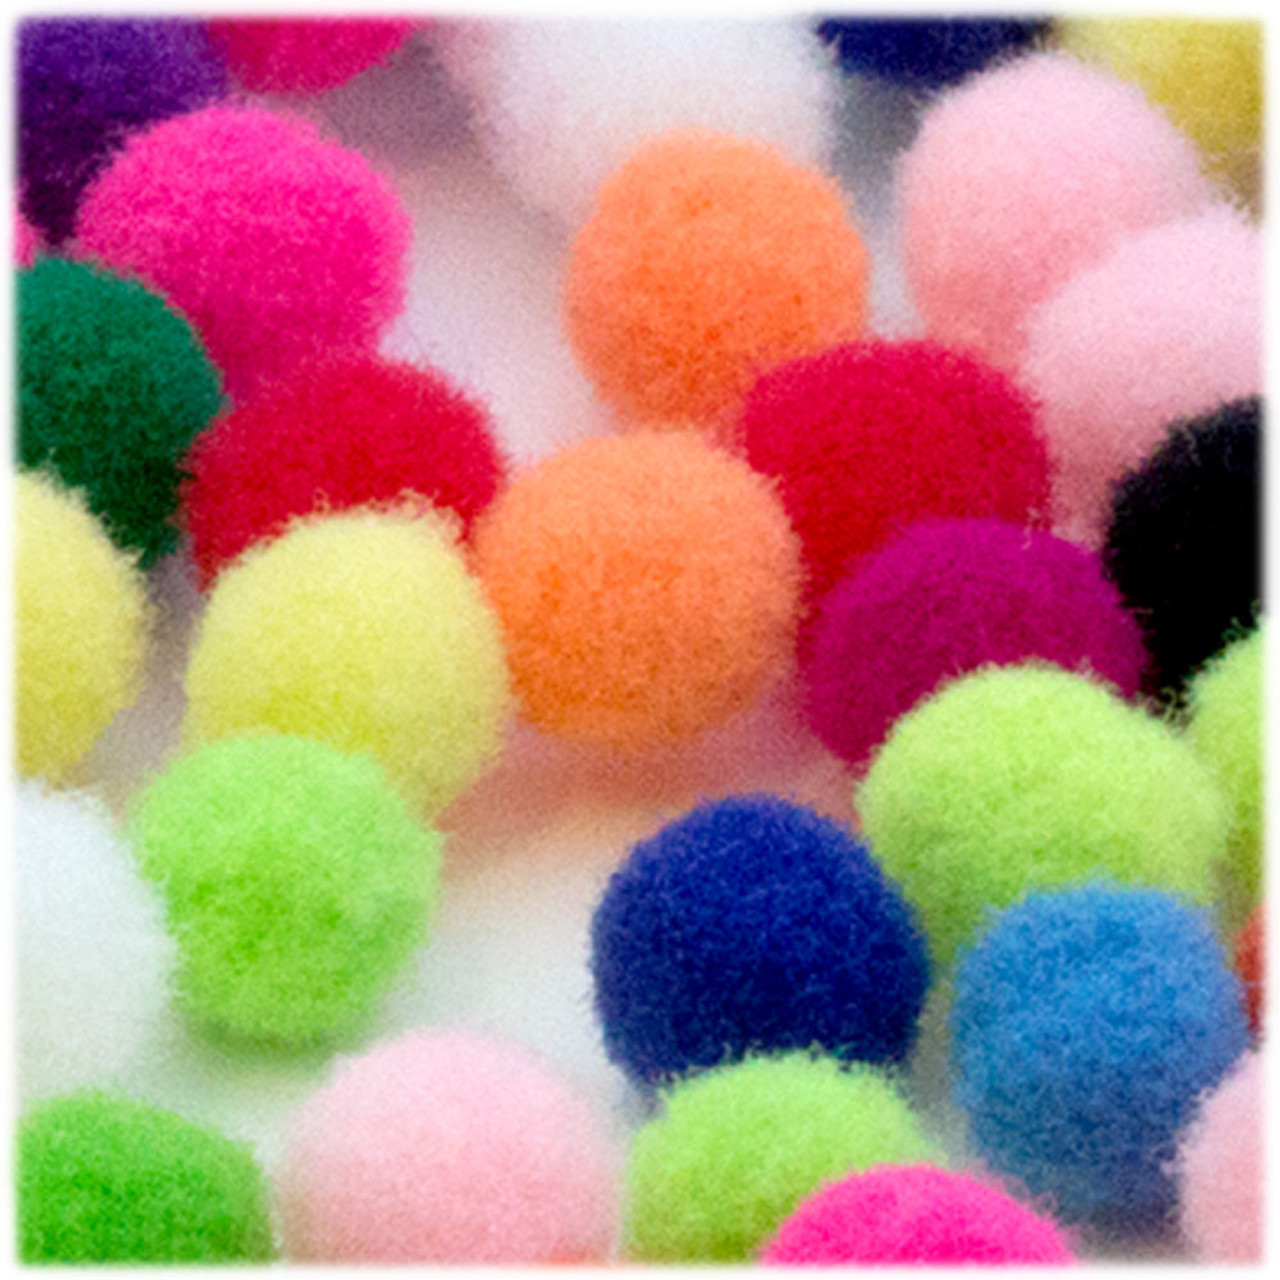 The Crafts Outlet 100-Piece Multi Purpose Pom Poms, Acrylic, 25Mm/About 1.0-inch, Round, Tri-Color Red White and Blue